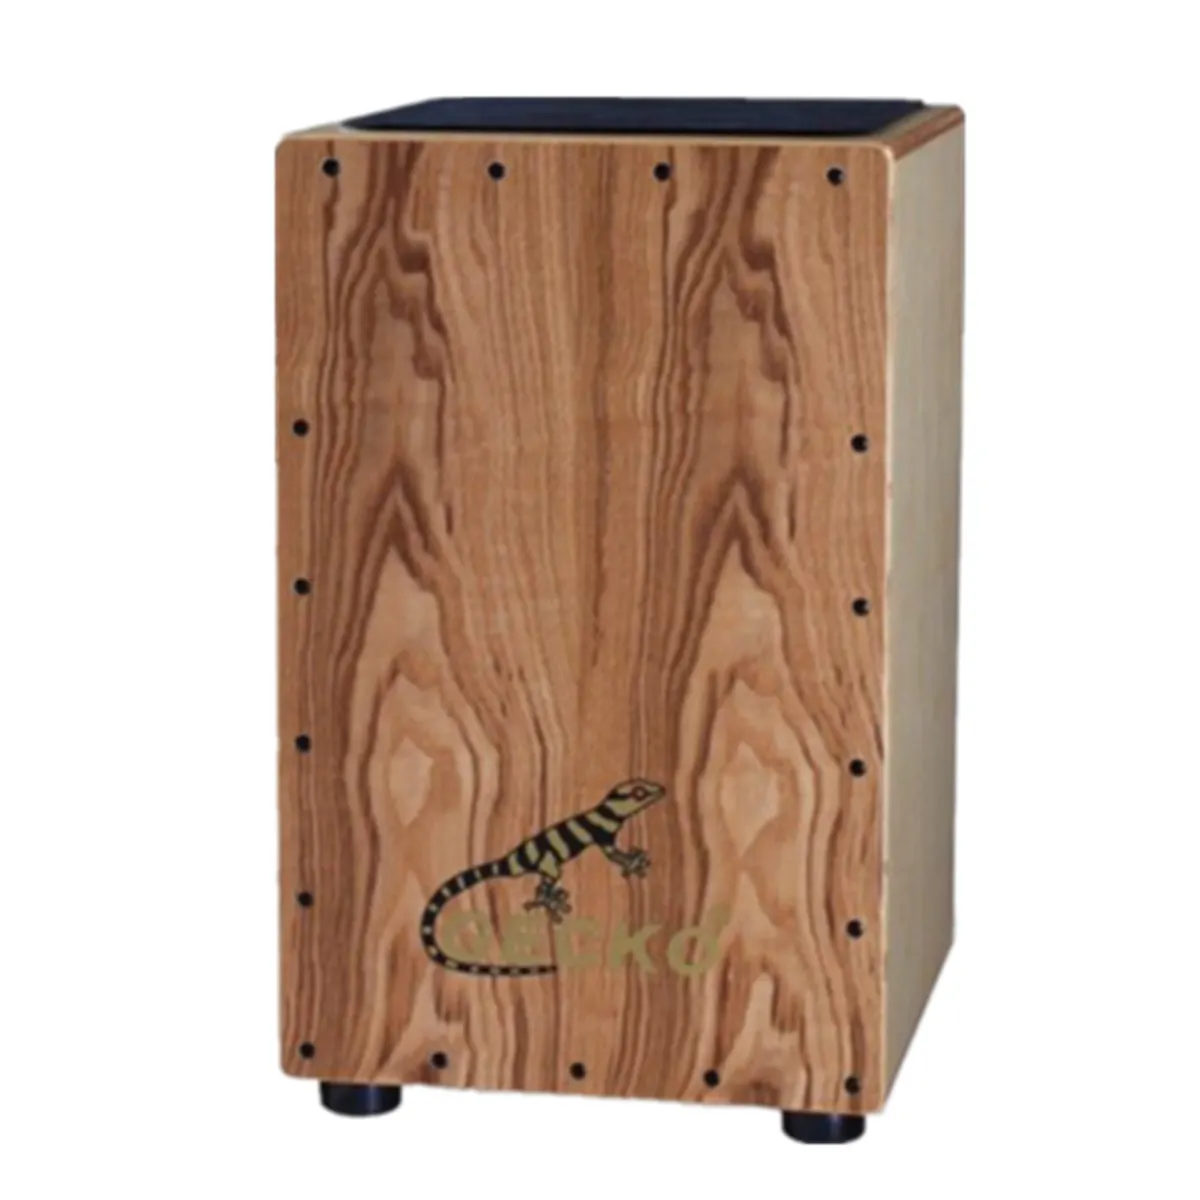 GECKO CL10OV cajon box drum high quality percussion instrument wholesale Olive wood playing surface cajon drum with steel string